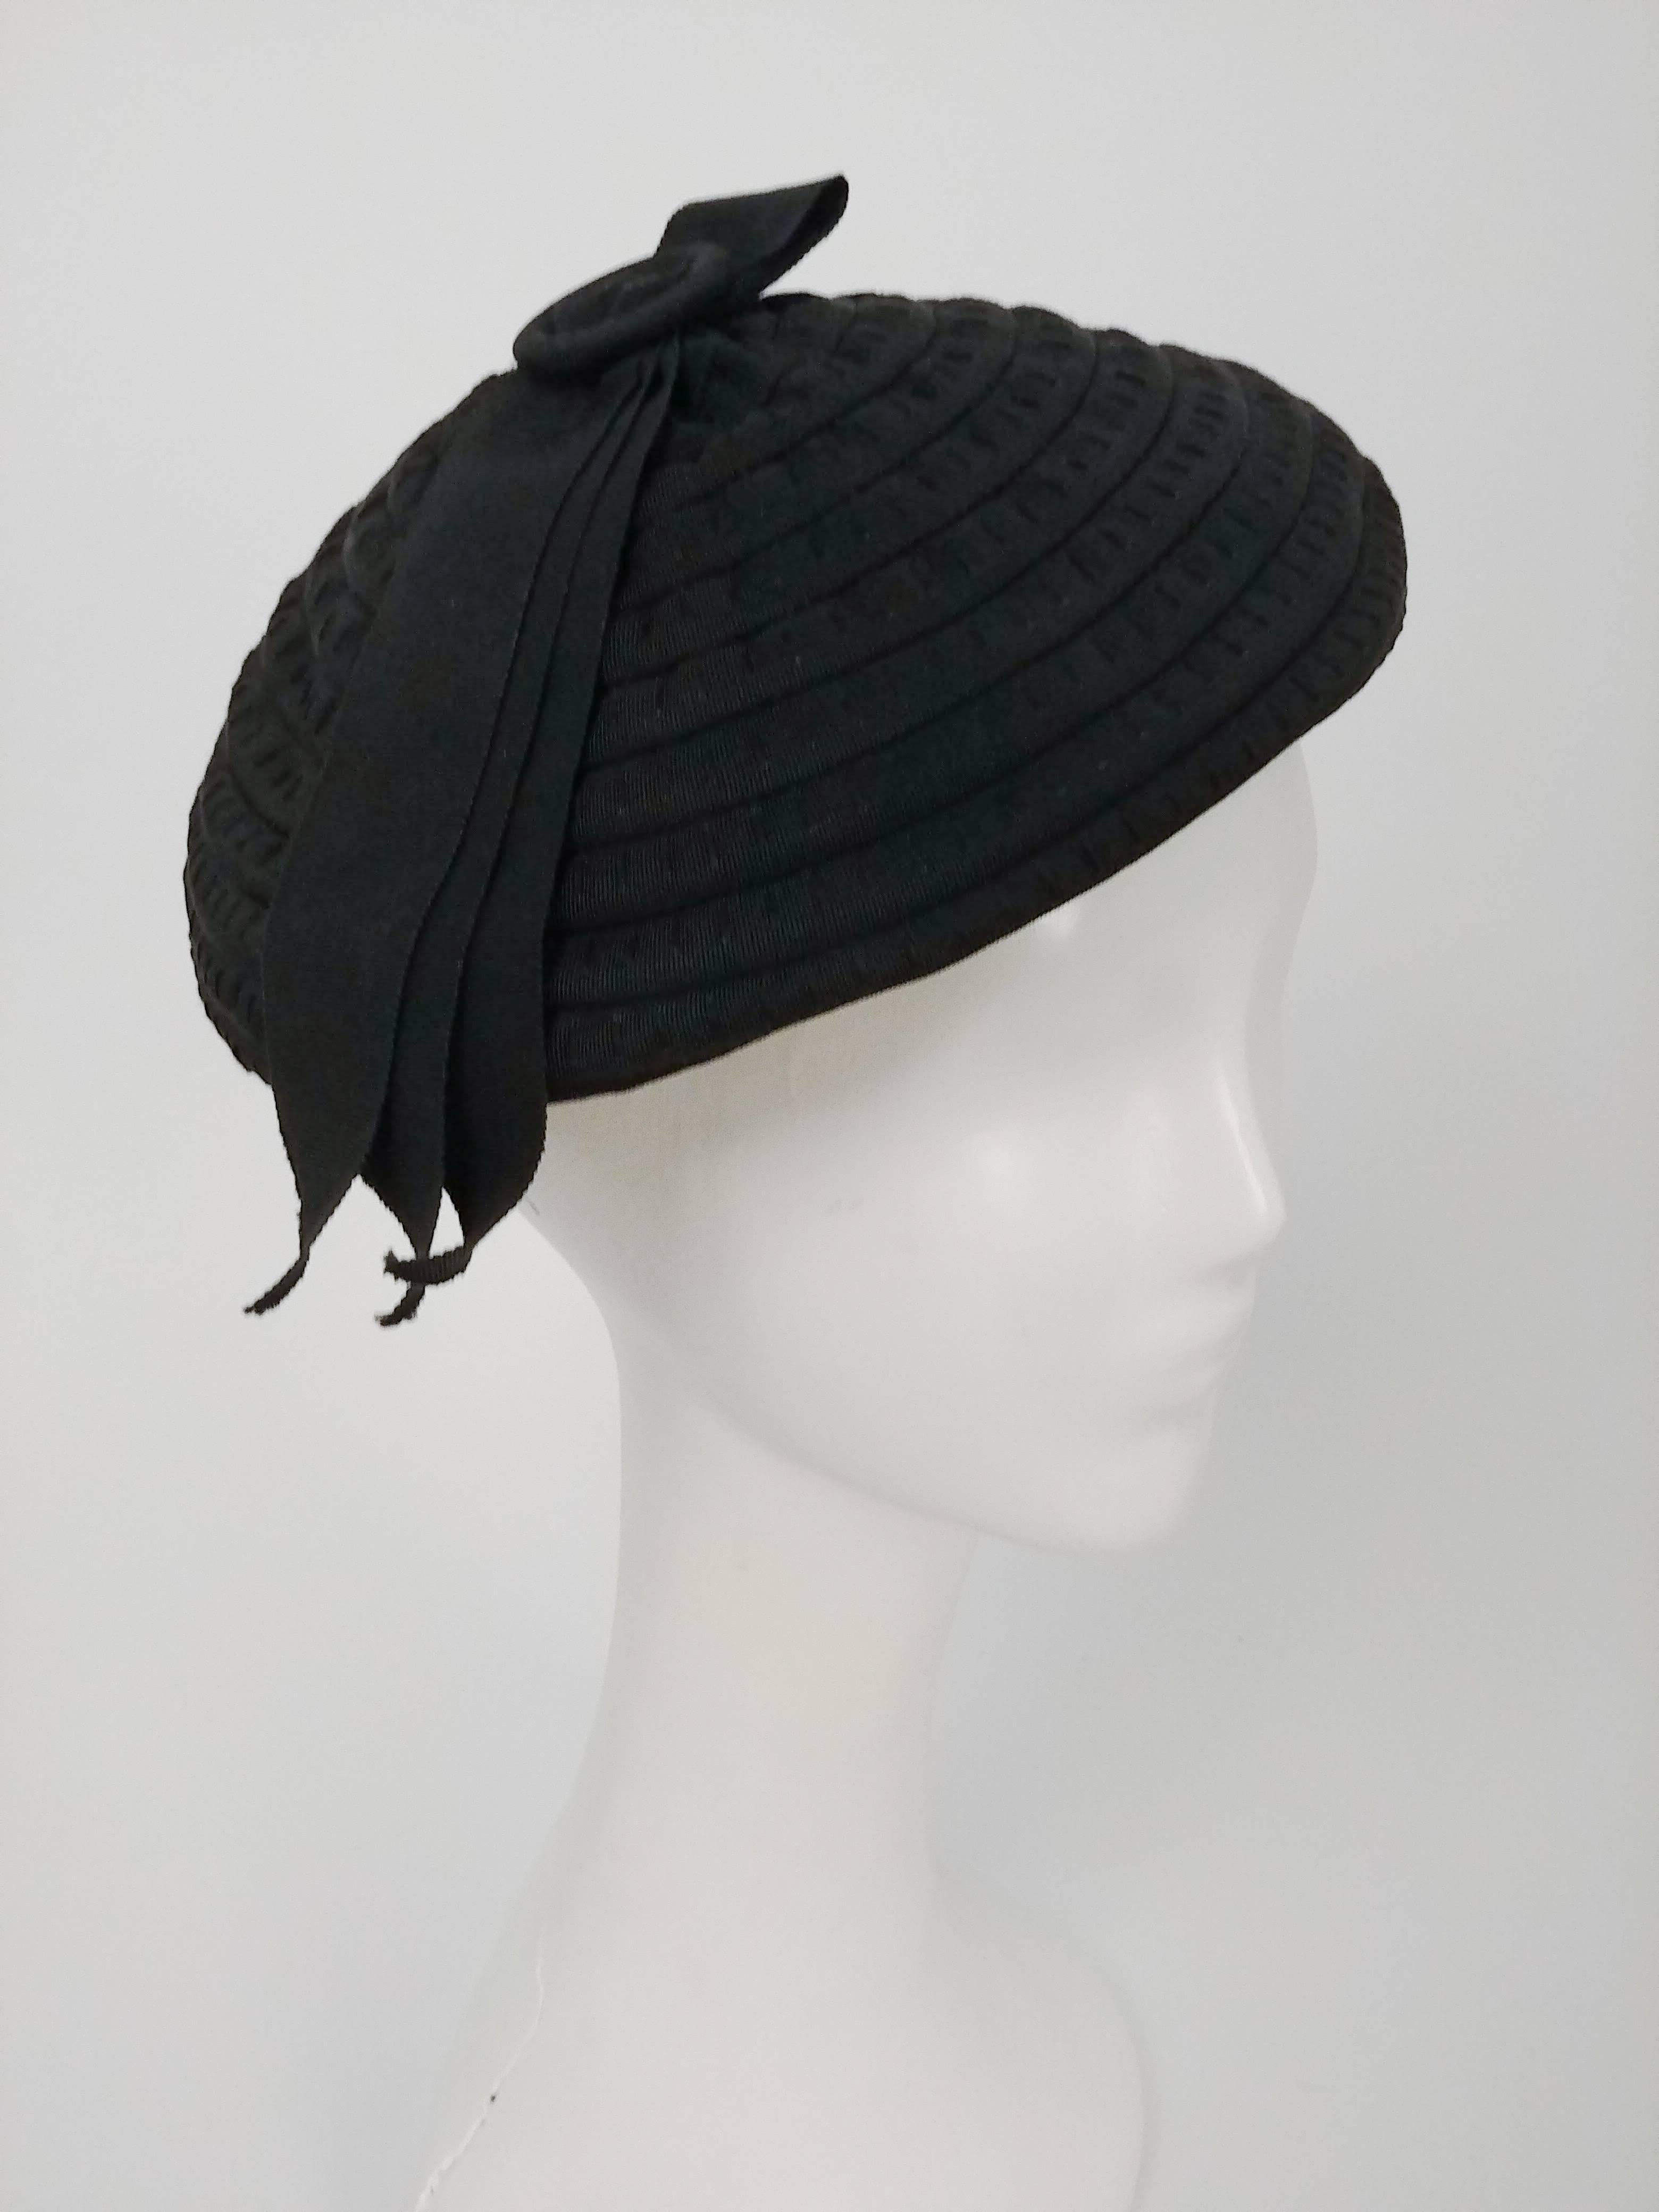 1930s Black Spiral Ribbon Beret. Beret made of gathered grosgrain ribbon sewn in a spiral, further embellished with ribbon and button at top center of hat. 